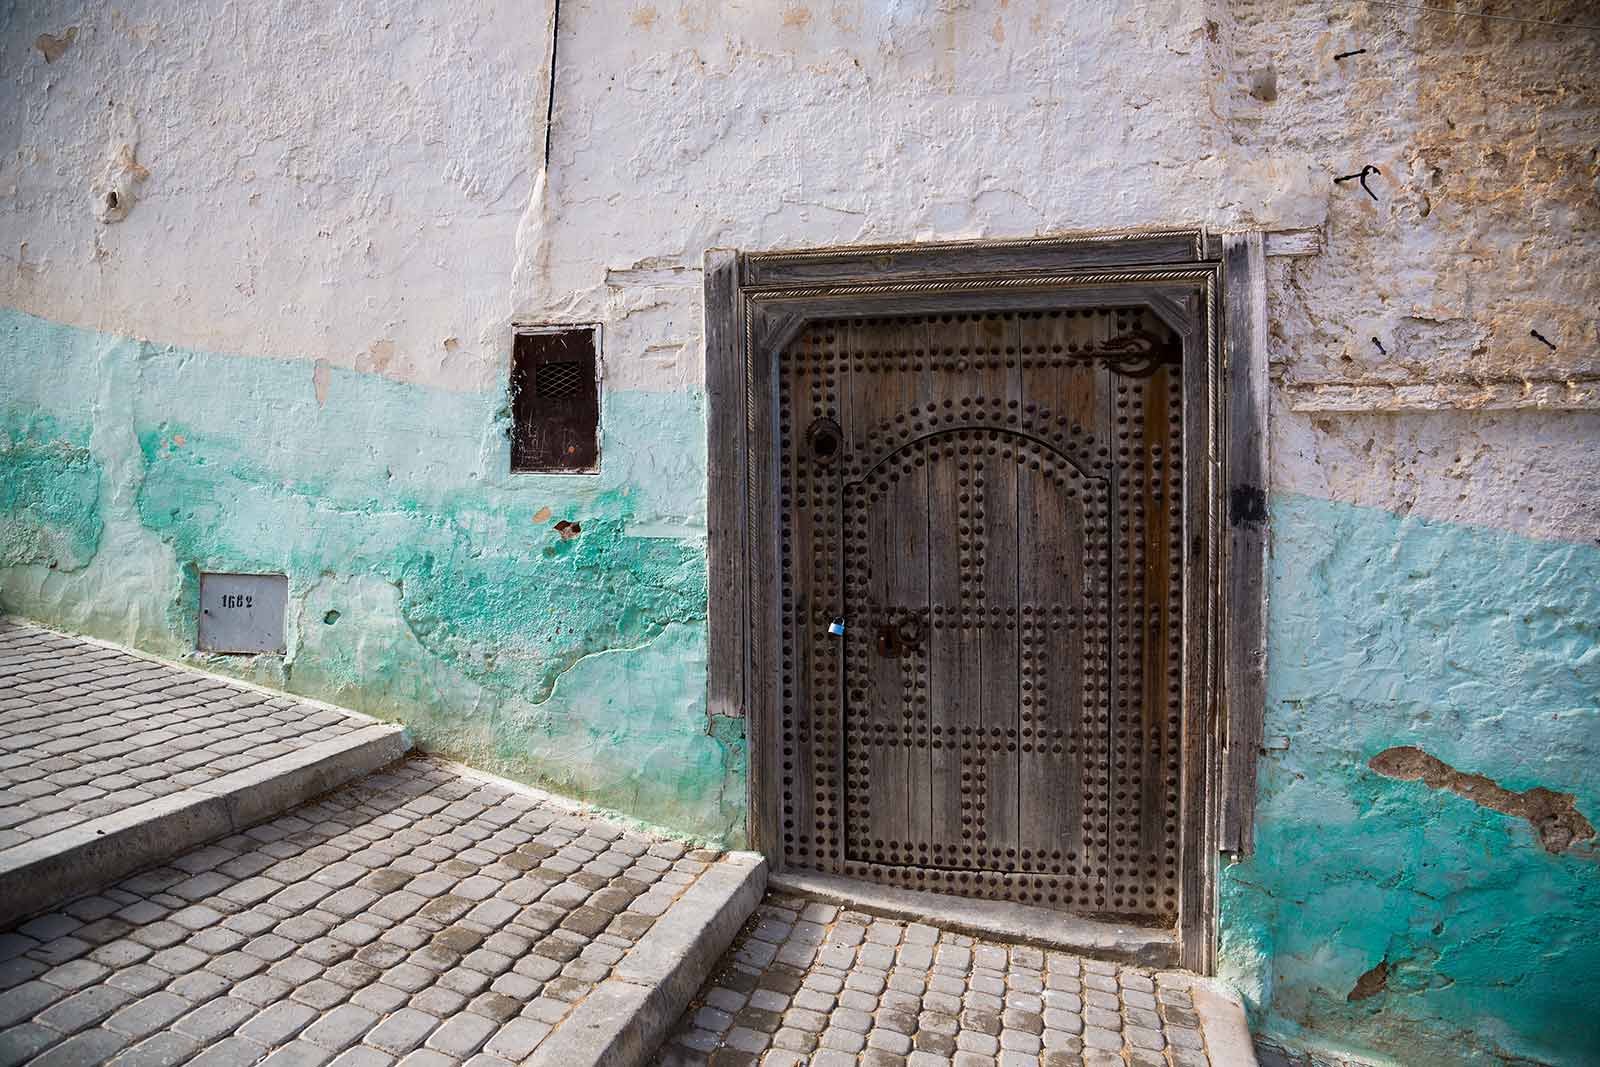 For some (Western) visitors, Moulay Idriss may still be too "dirty" or "undeveloped", yet it is exactly that, that makes it authentic and gives it its charm.